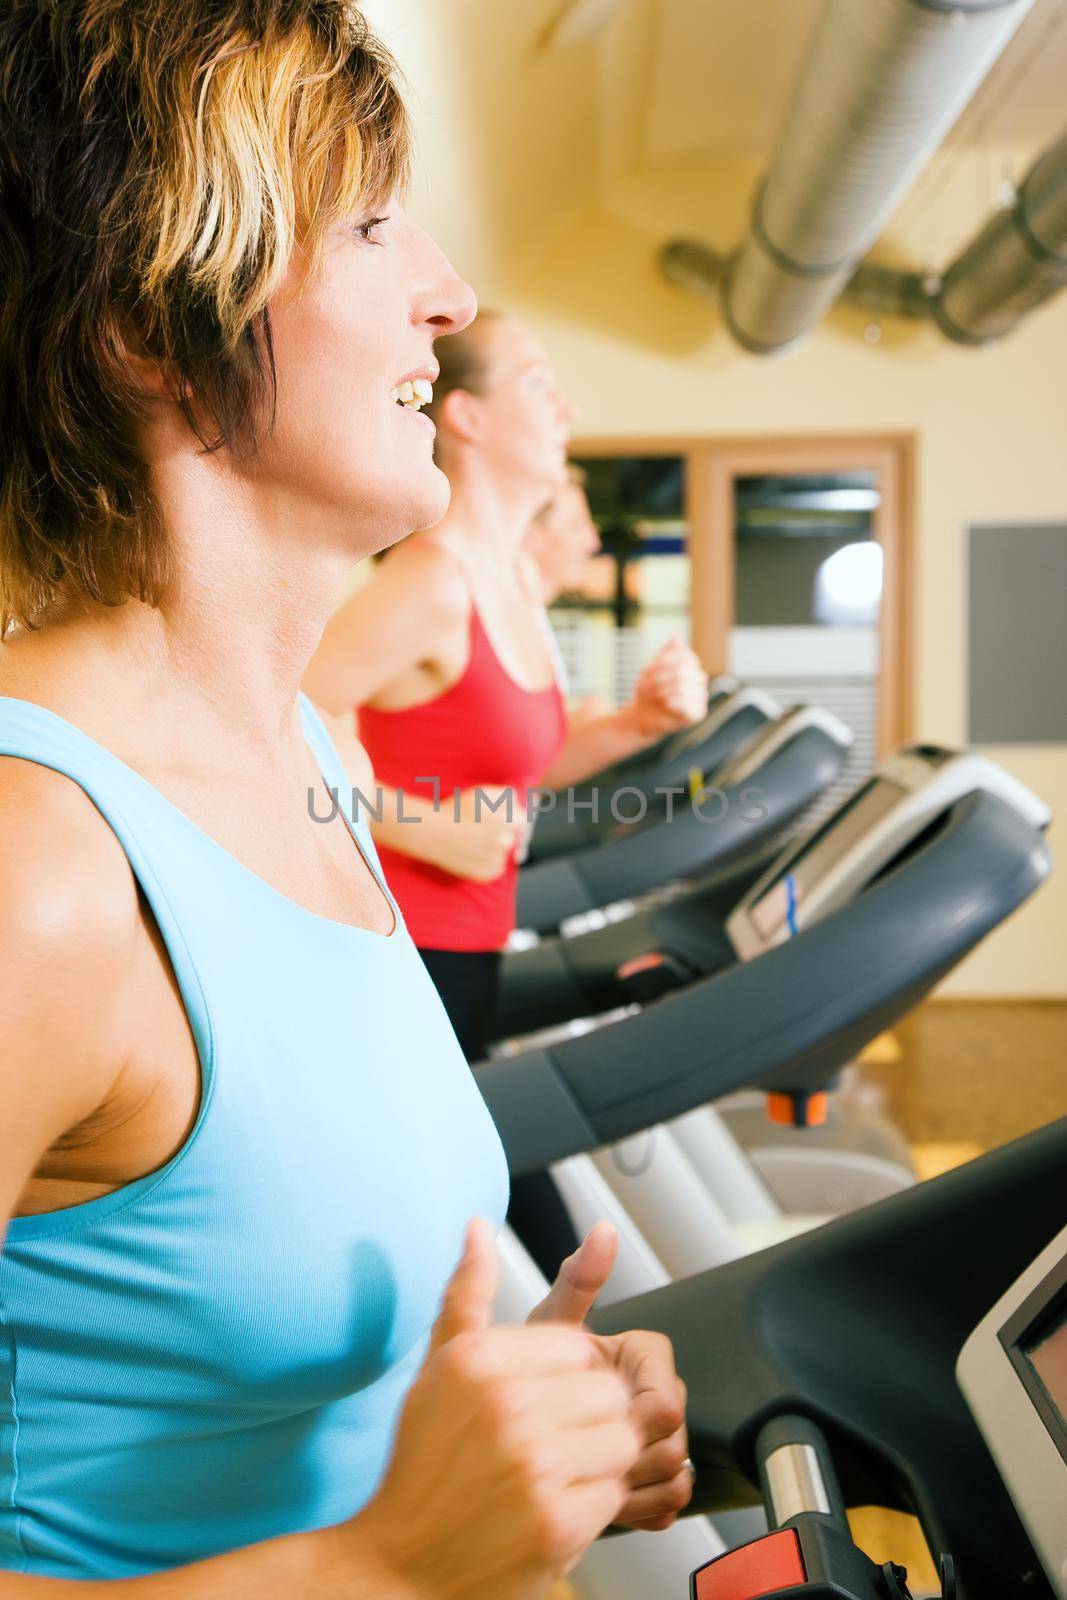 Three happy people running on a treadmill in a gym; slight motion blur on arms of woman in foreground for a dynamic picture